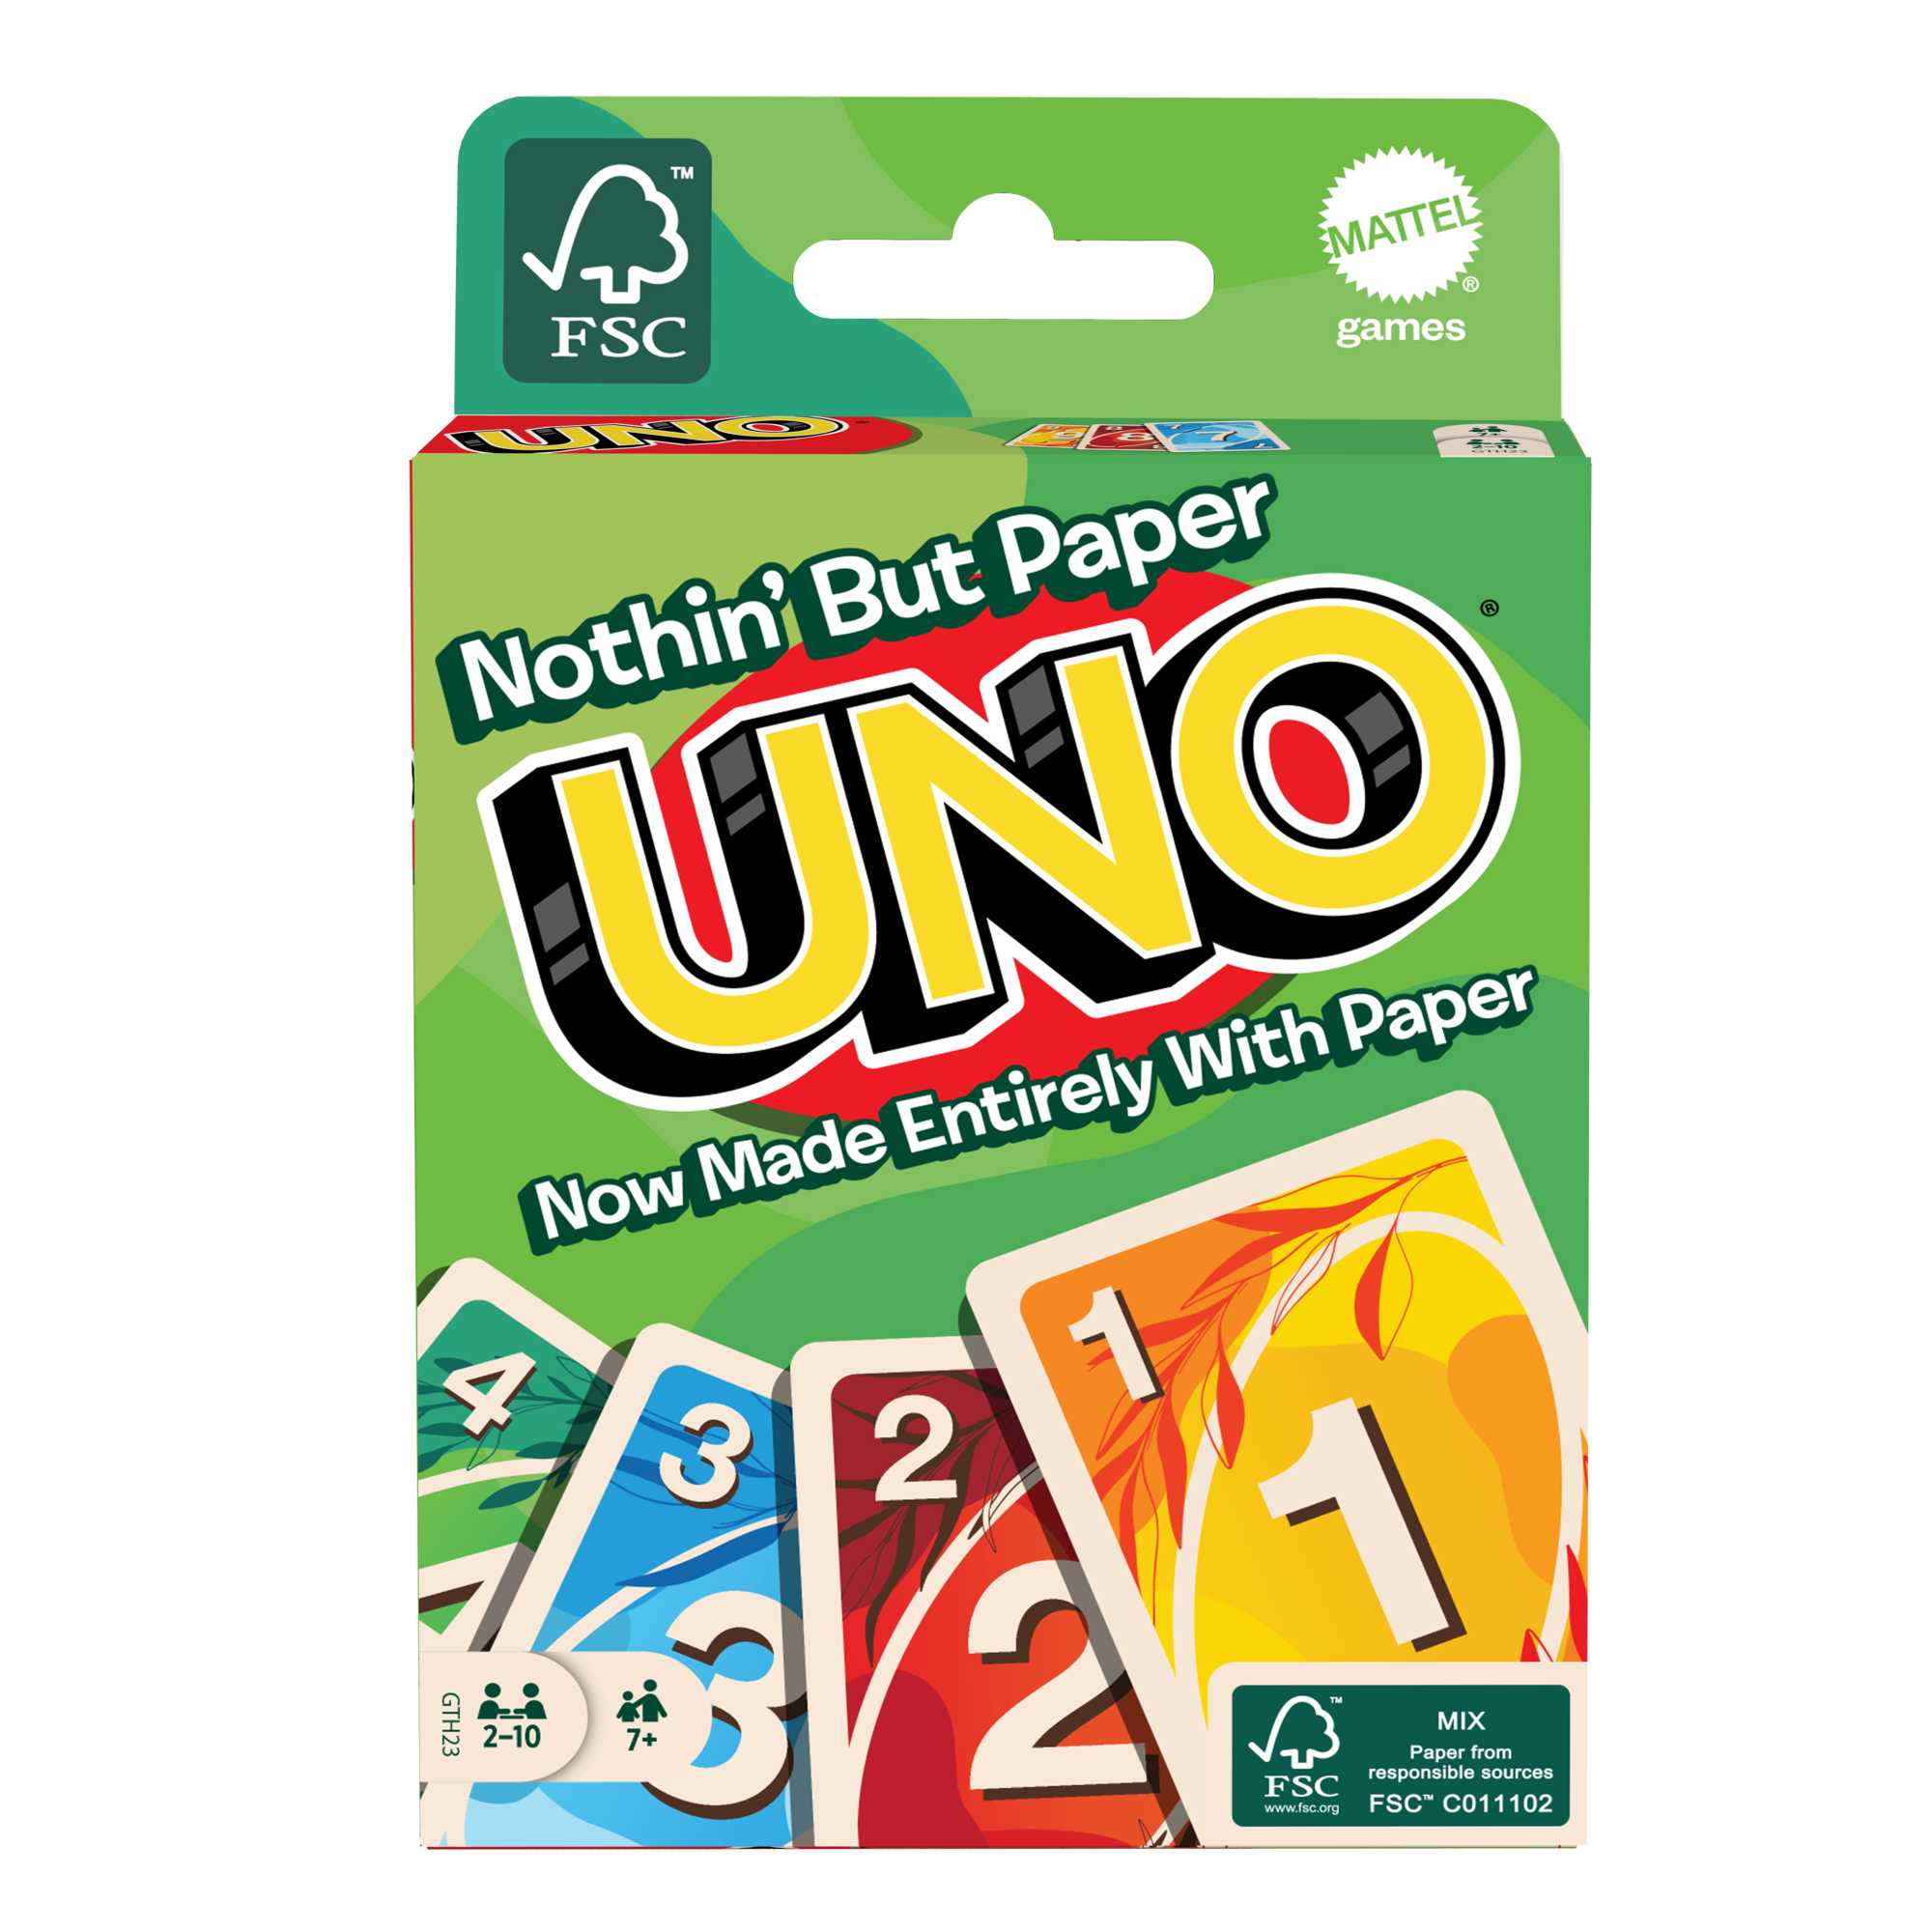 UNO Online Free Card Game - Faded Spring